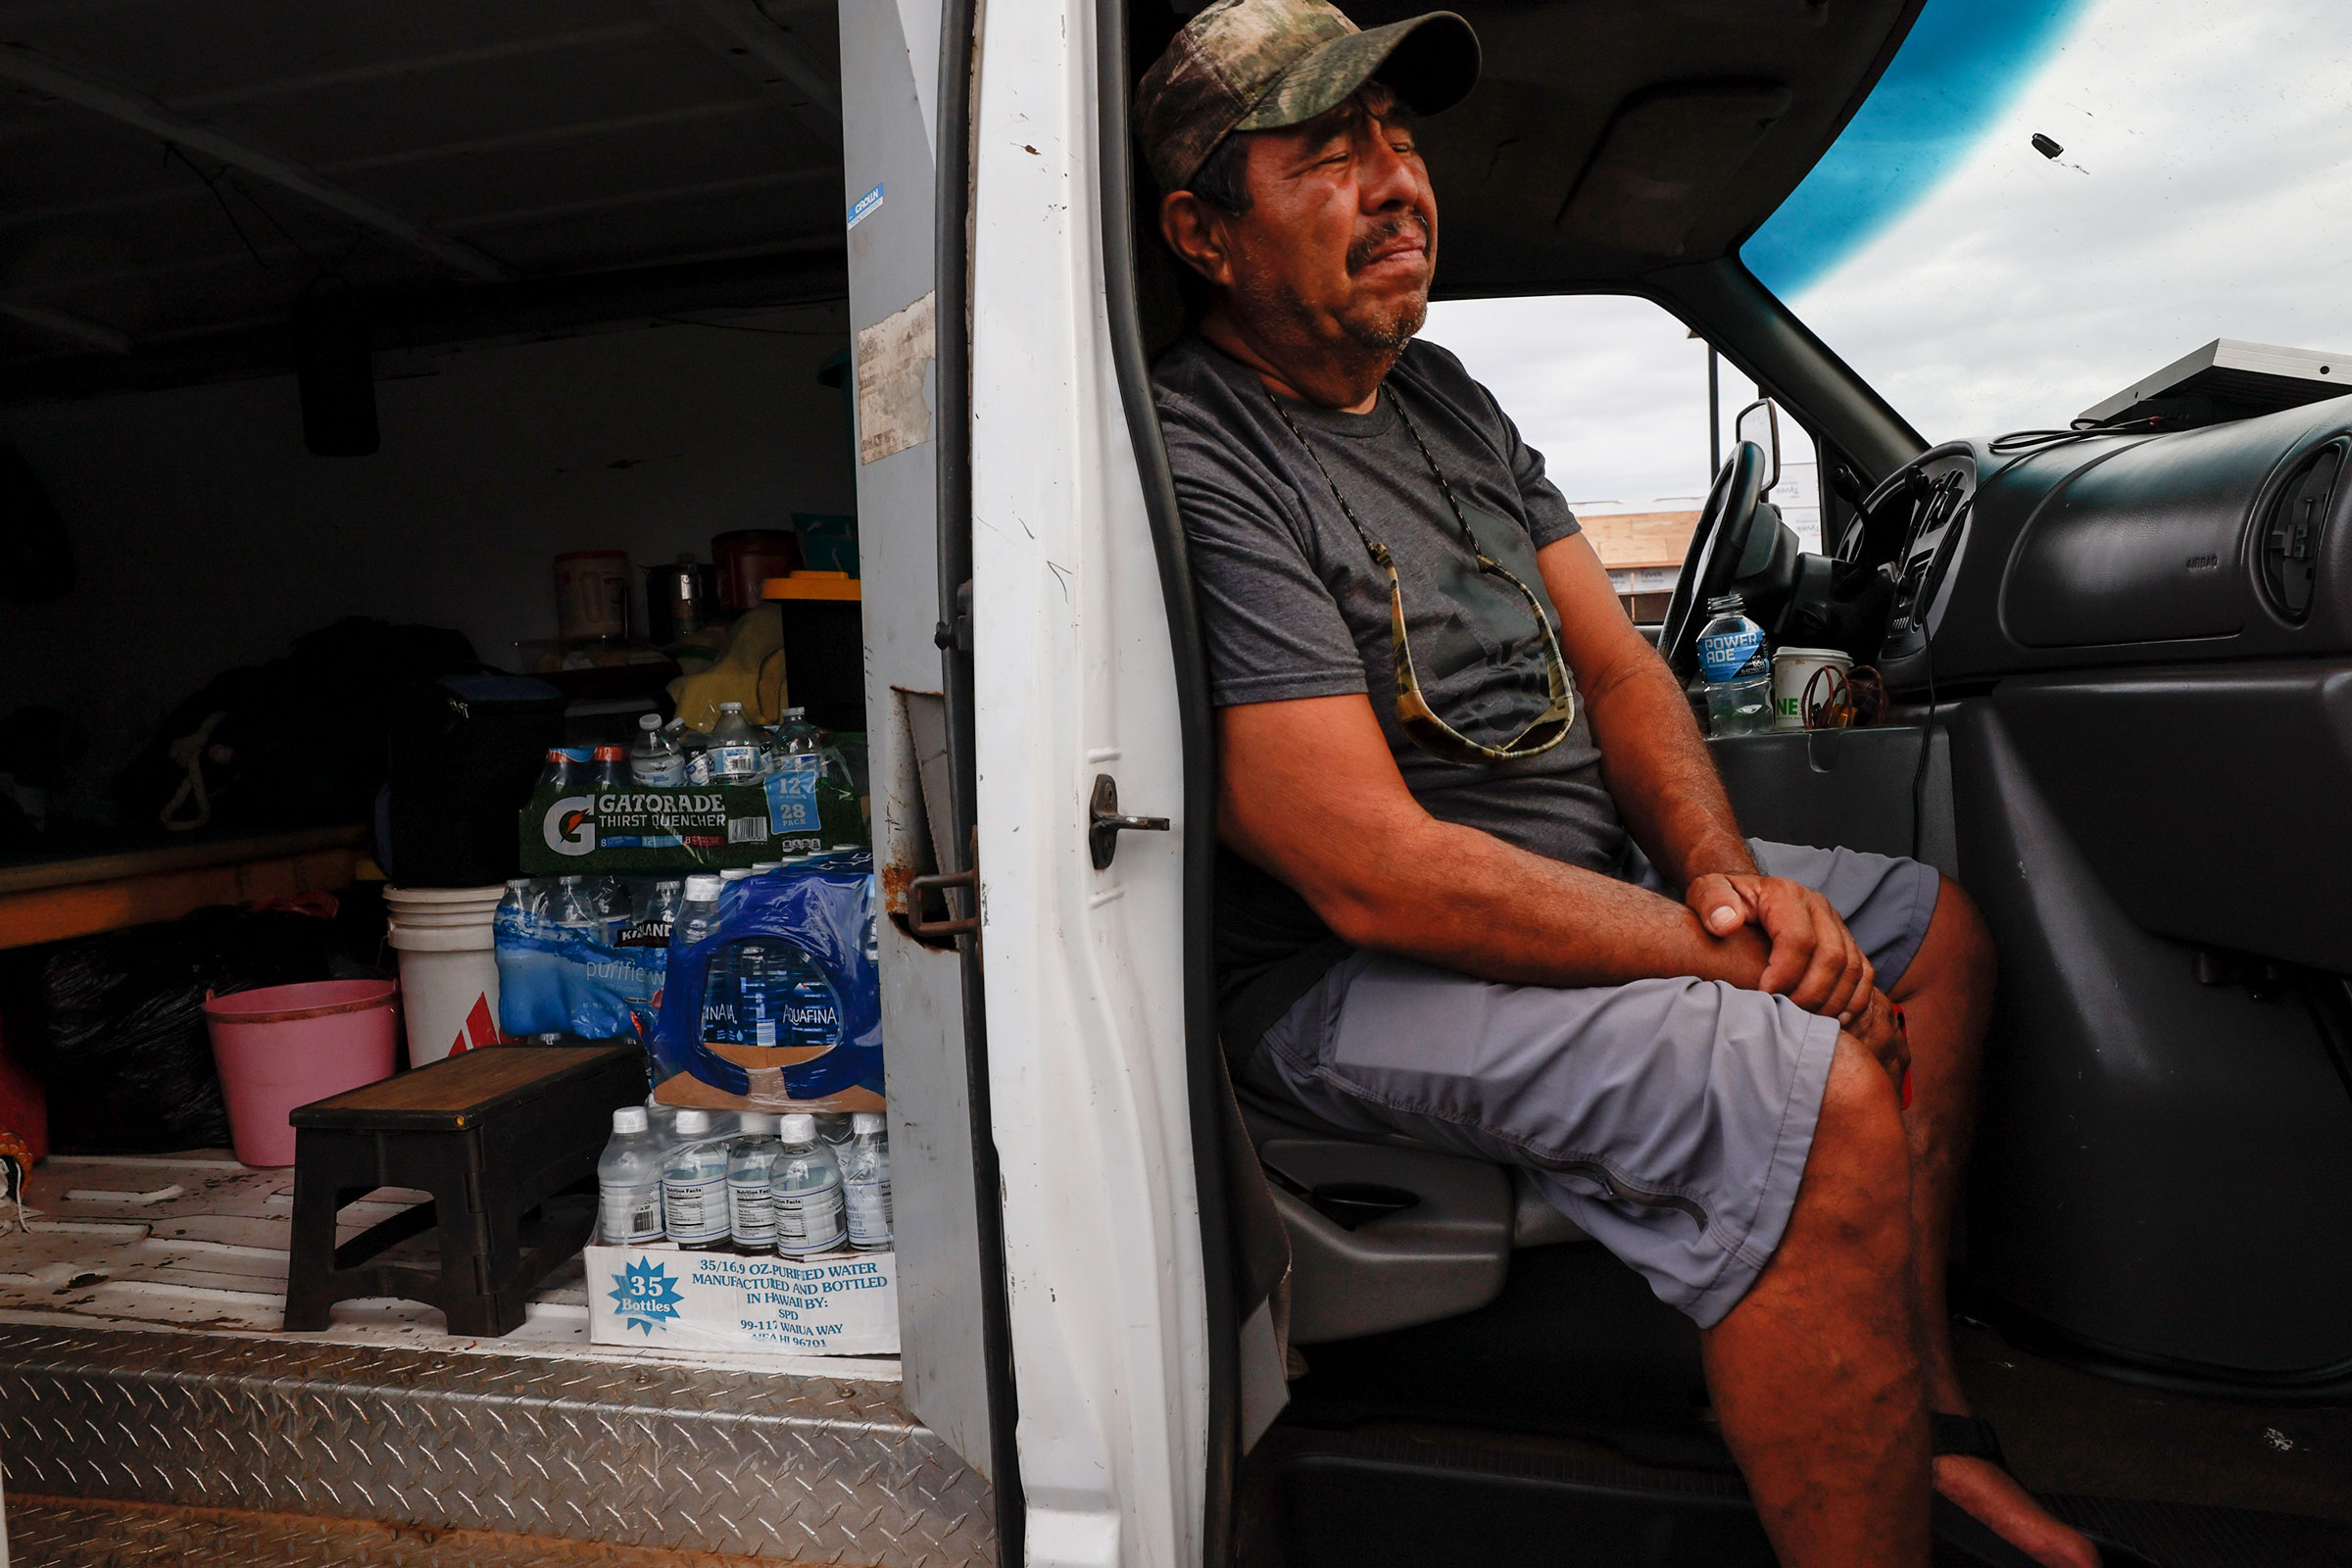 Jesus Vasquez sits in his van waiting to return to his home near Lahaina